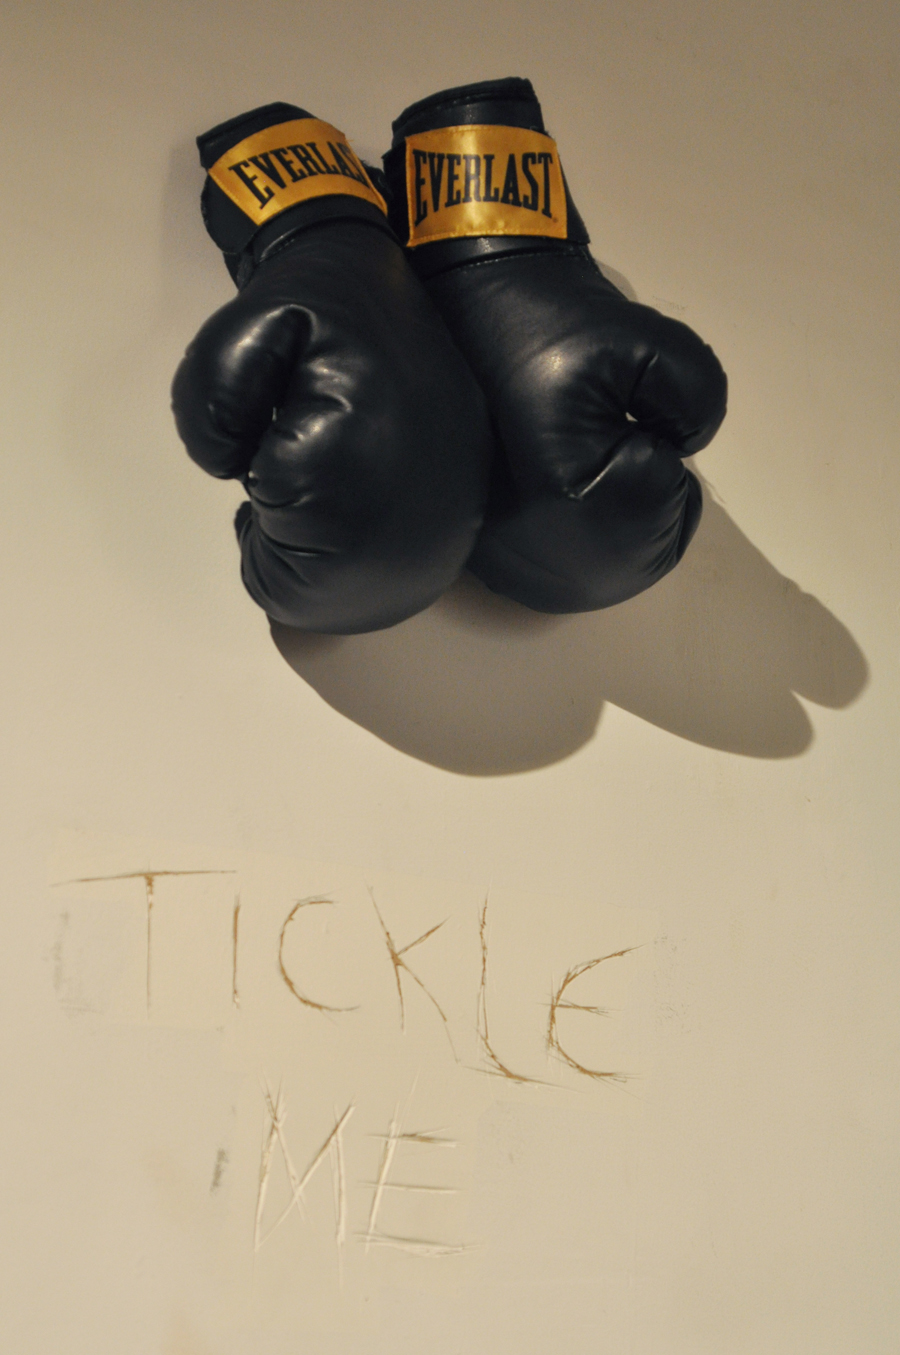 Tickle Me (Performance Installation, 2012)